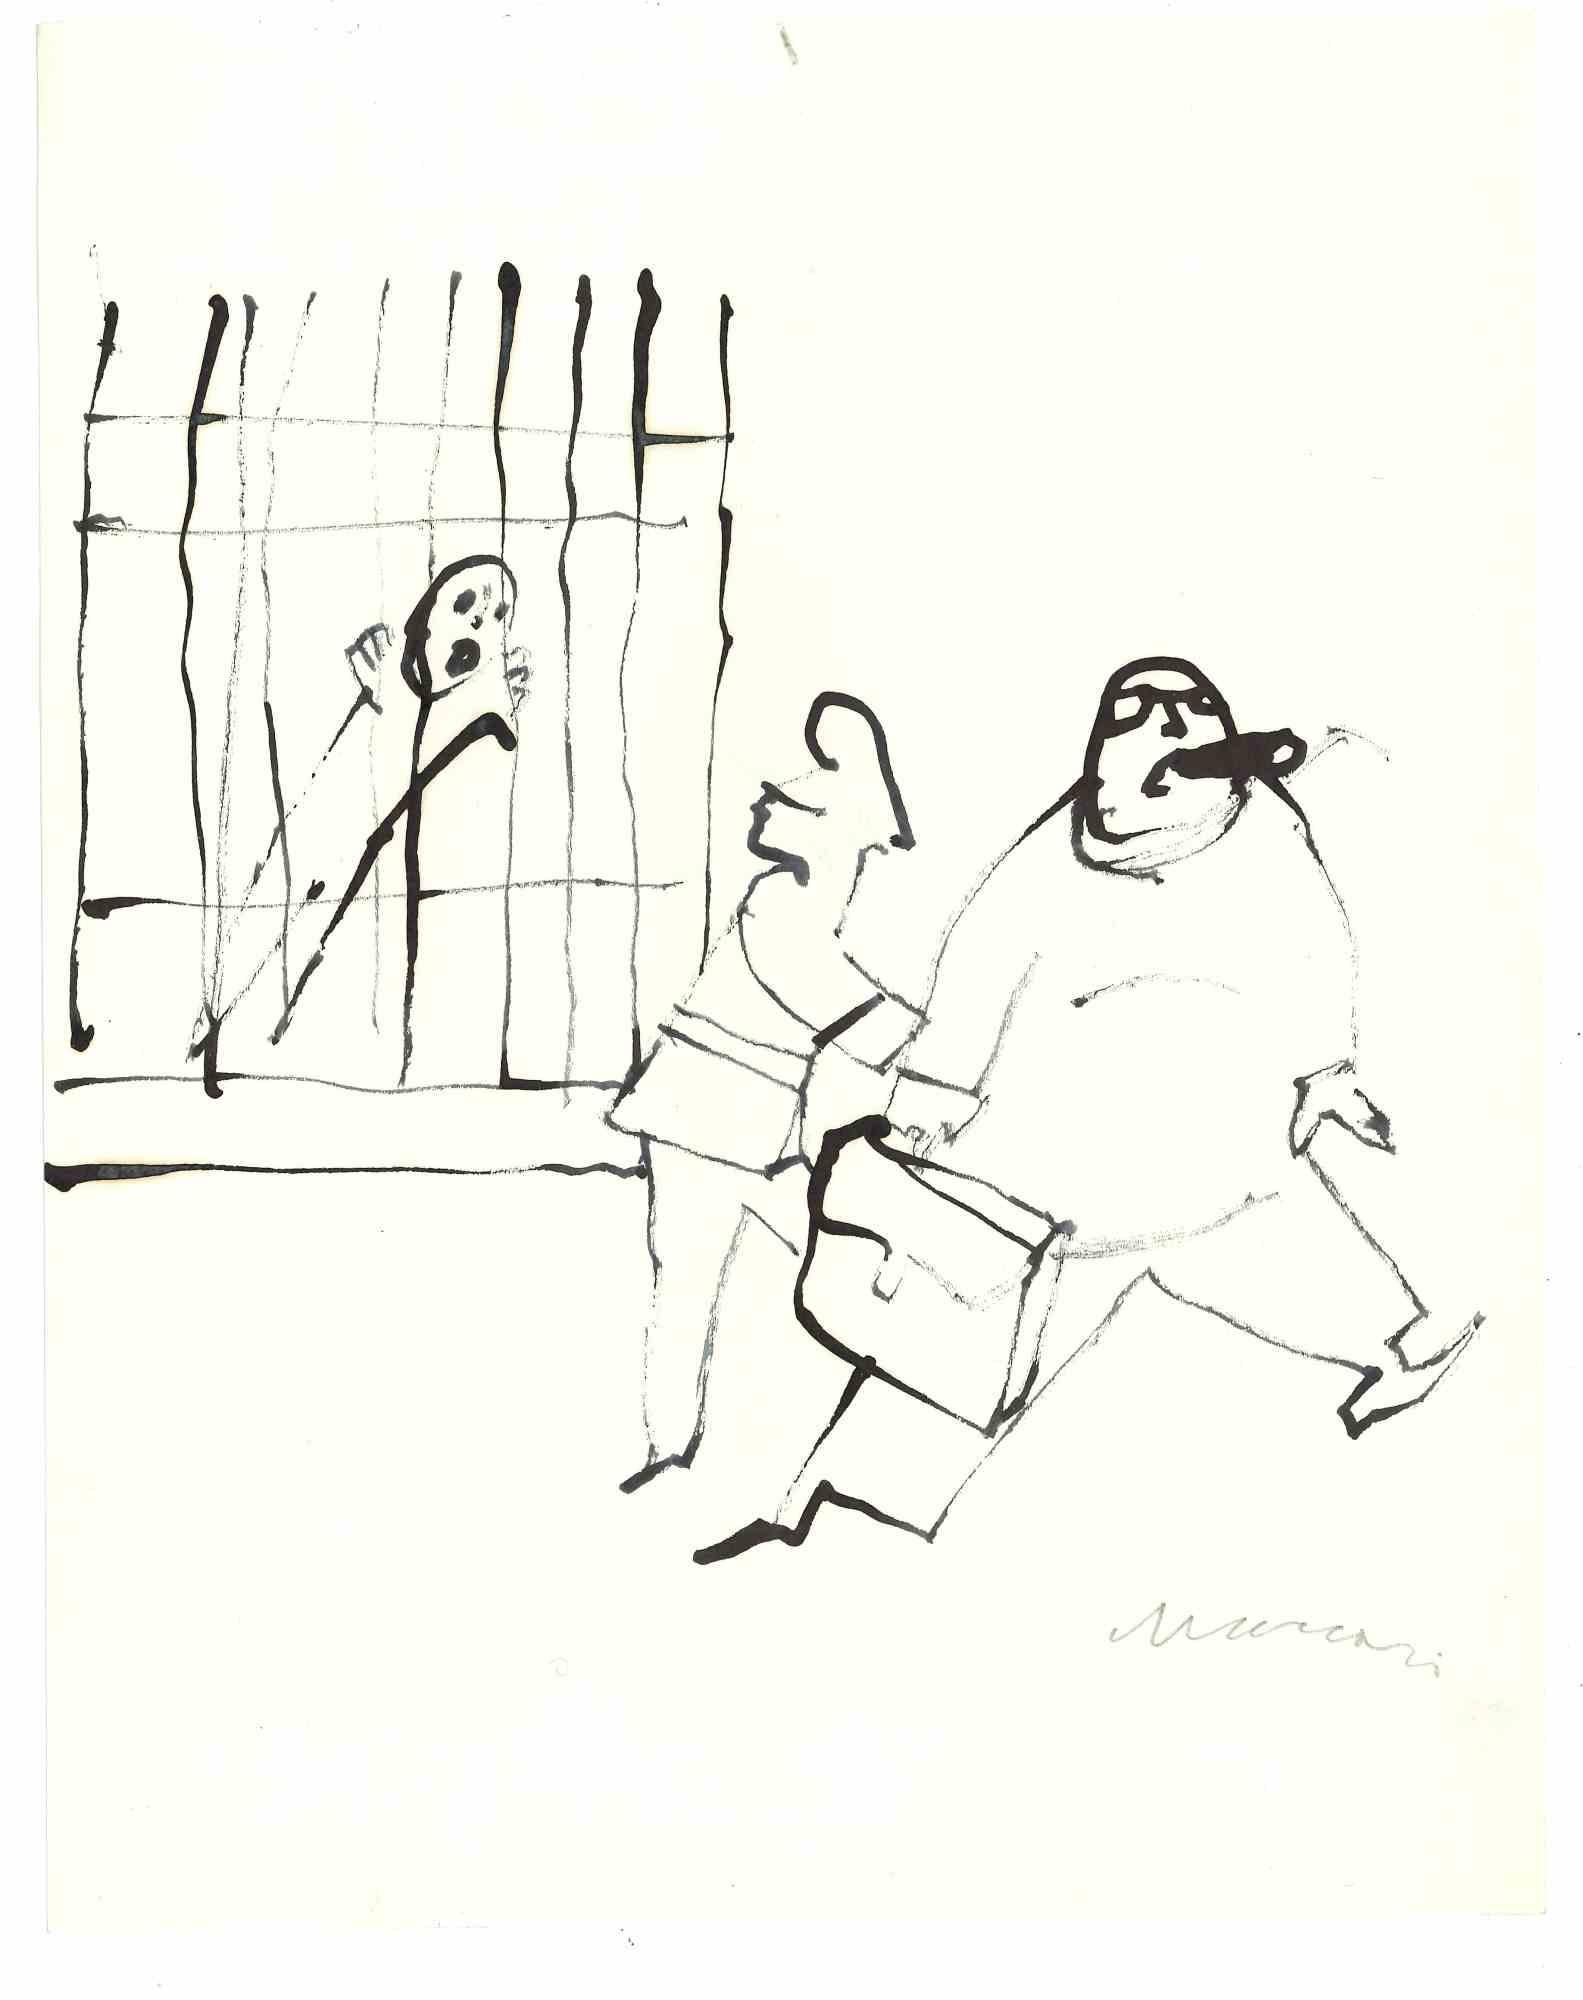 Unknown Figurative Print - I am Innocent! -  Drawing on Paper by Mino Maccari - 1970s